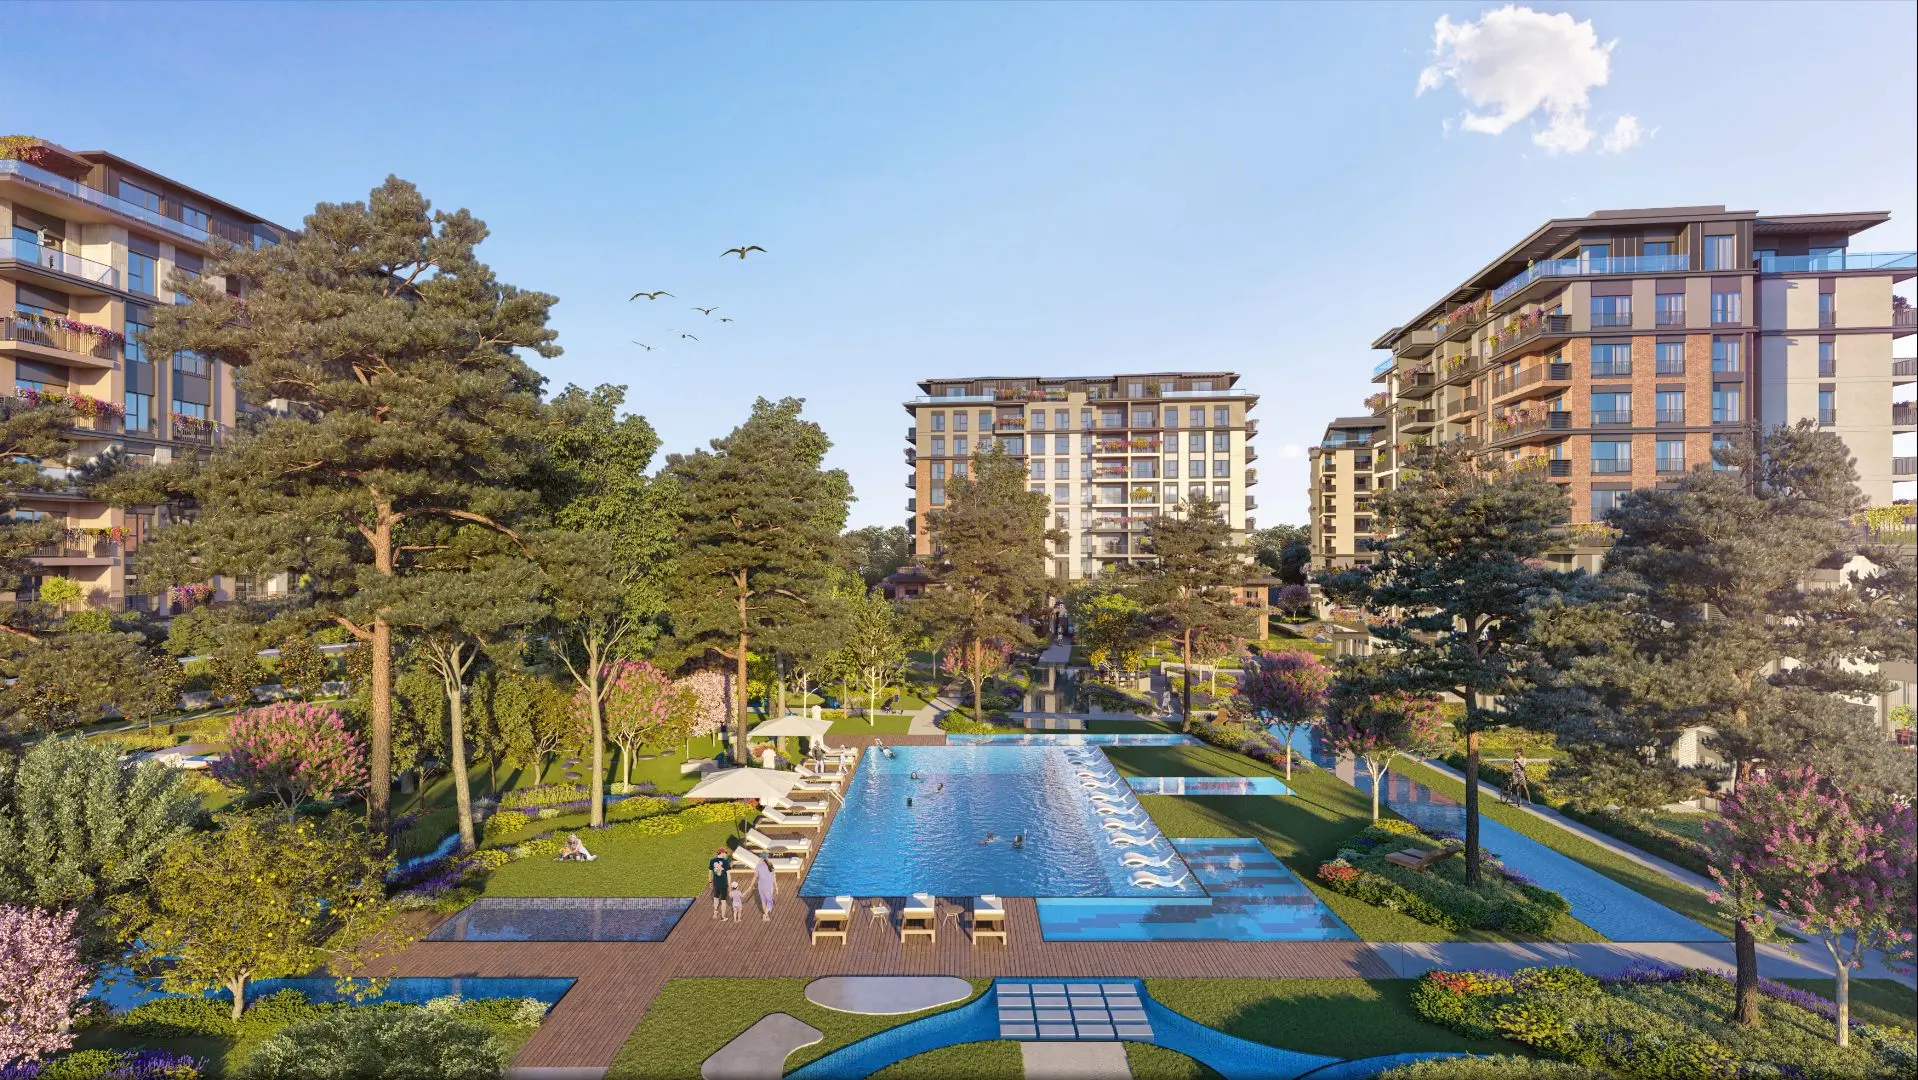 NEW LARGE HOUSING PROJECT IN ISTANBUL